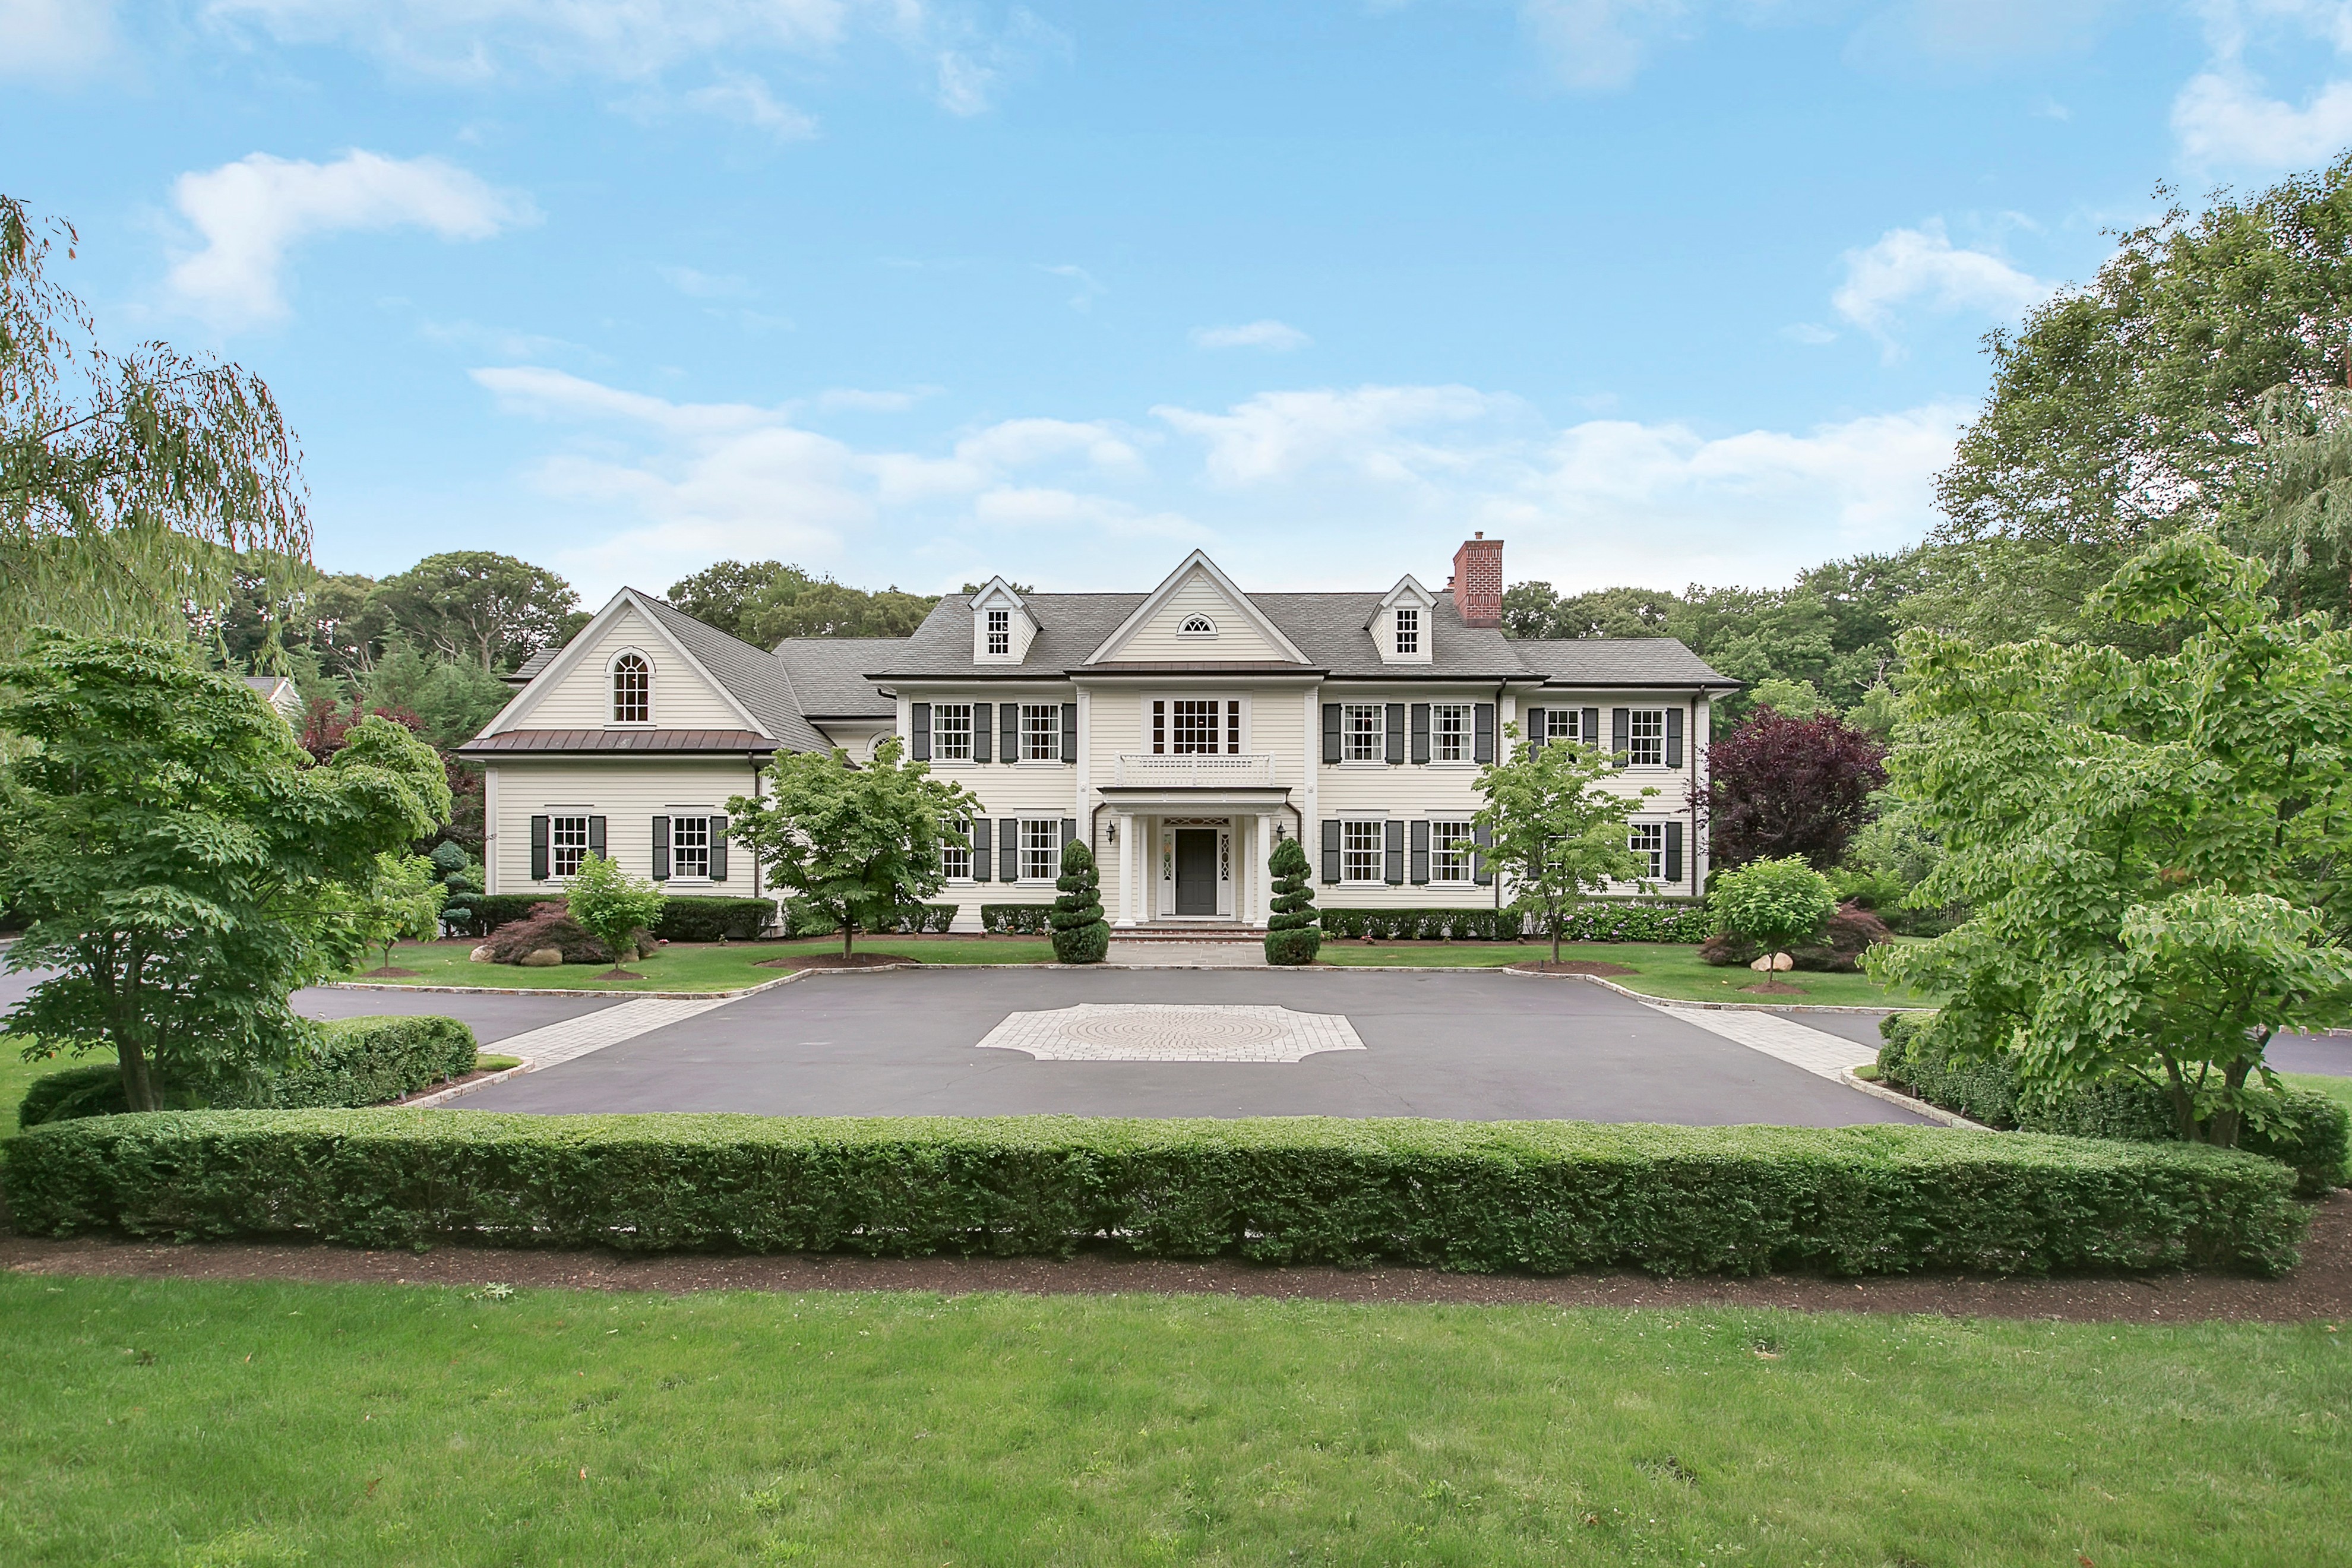 Long Island Business News – Priciest Home Sales in Nassau County